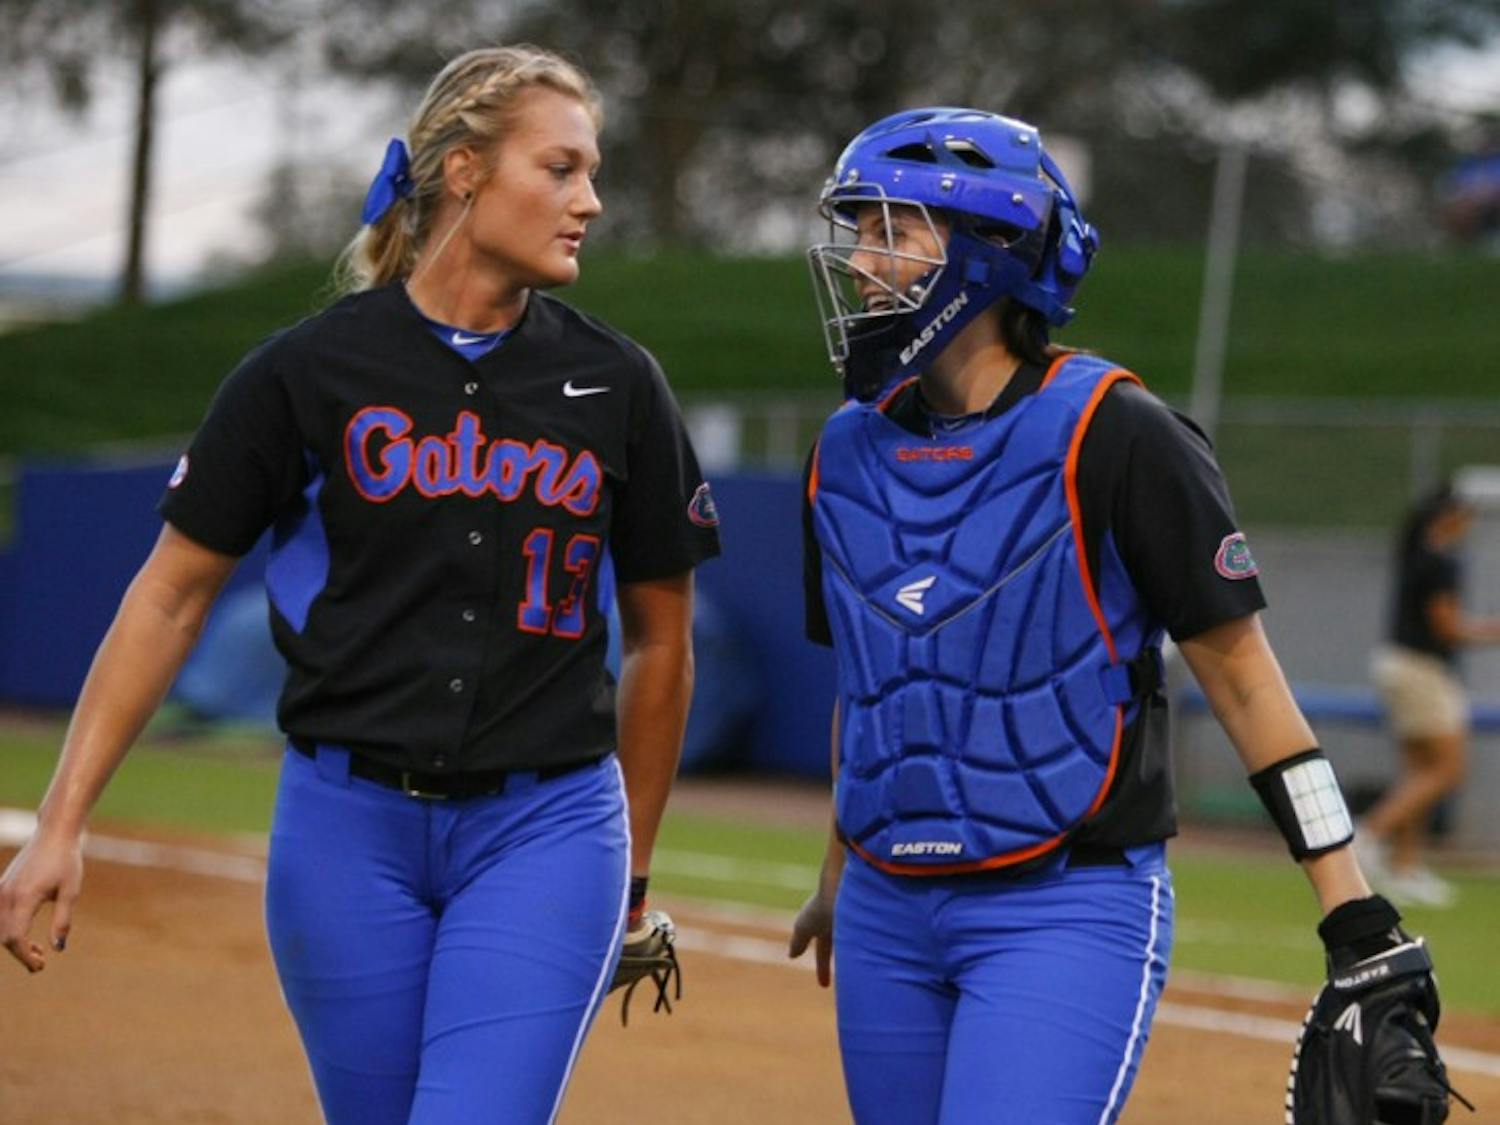 Sophomore pitcher Hannah Rogers (left) said junior catcher Kelsey Horton (right) has adjusted well to playing behind the plate in place of injured starter and clean-up hitter Brittany Schutte.